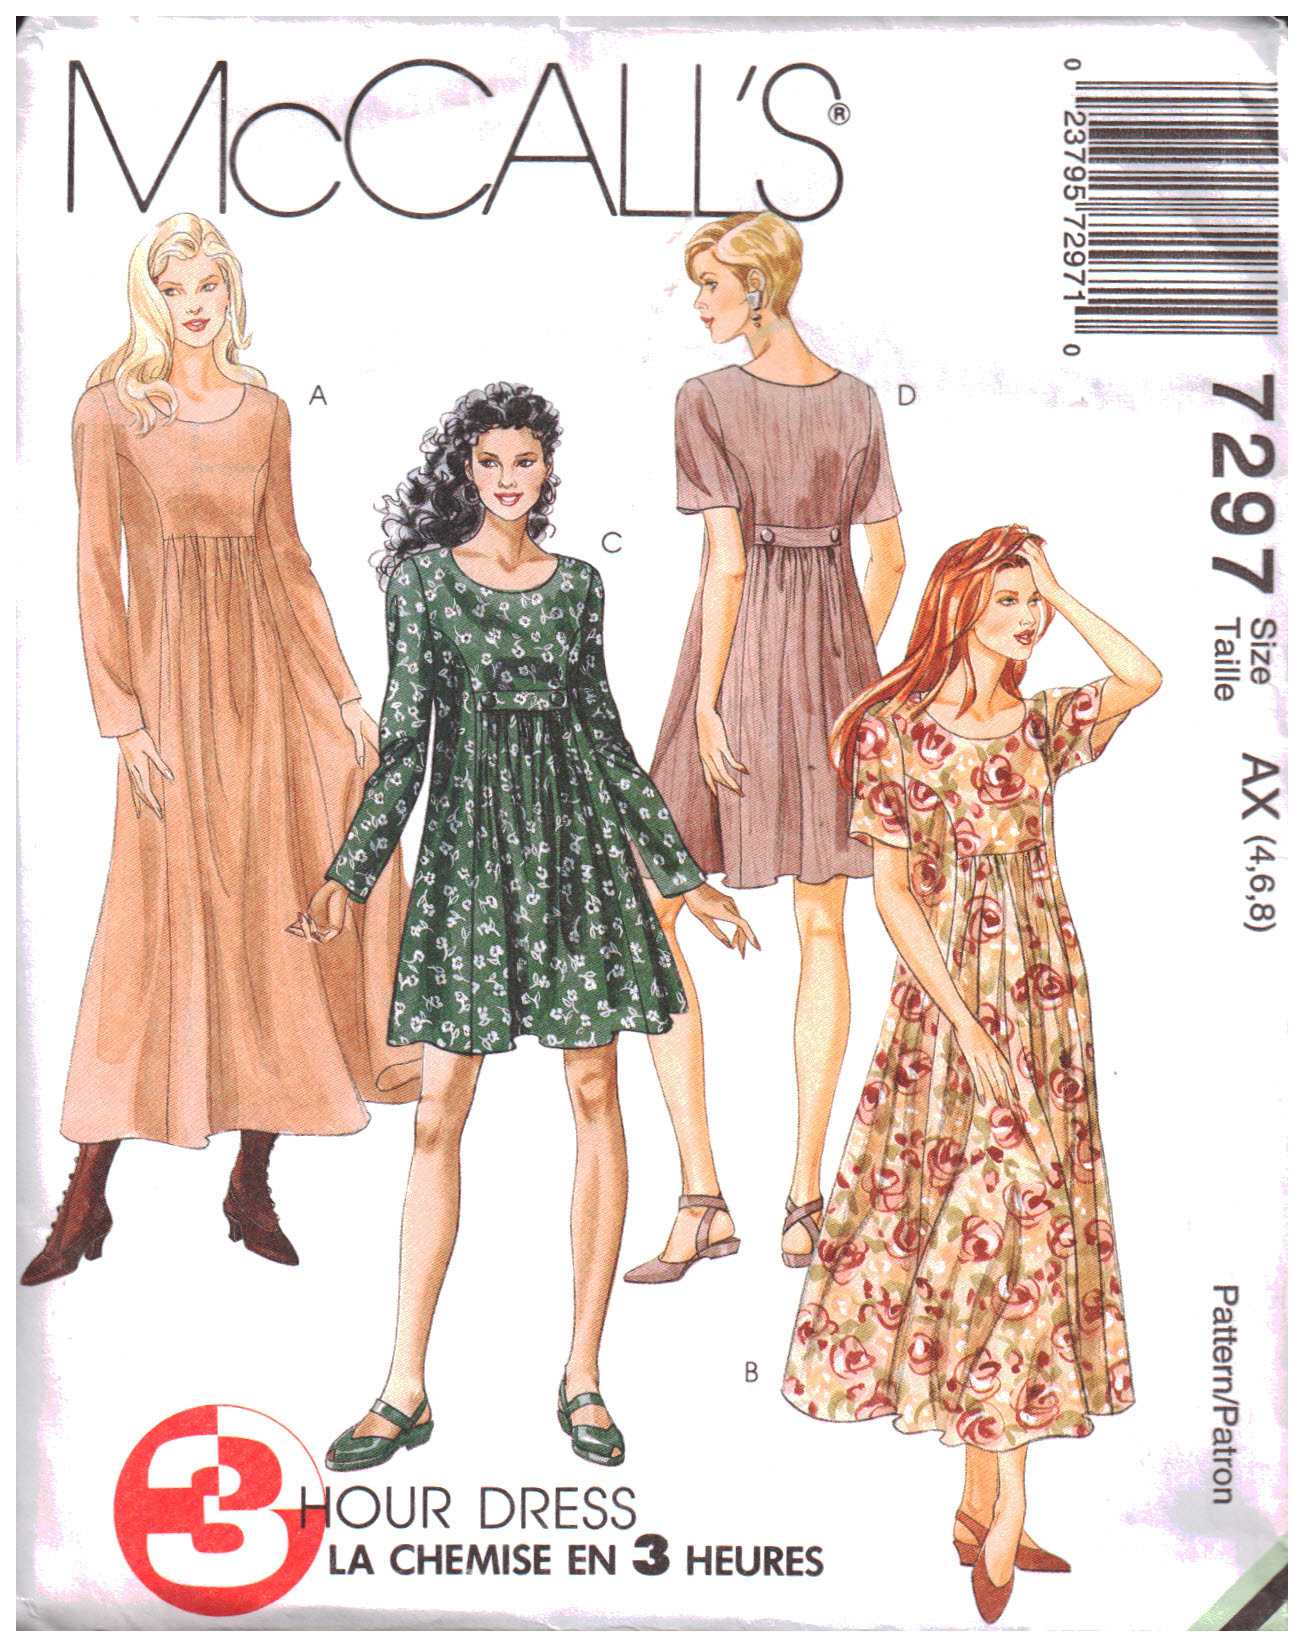 McCall Pattern Company McCall's M7971A5 Women's 3/4 Sleeve, Sleeveless, and  Leg Slit Dress Sewing Patterns, Sizes 6-14, various